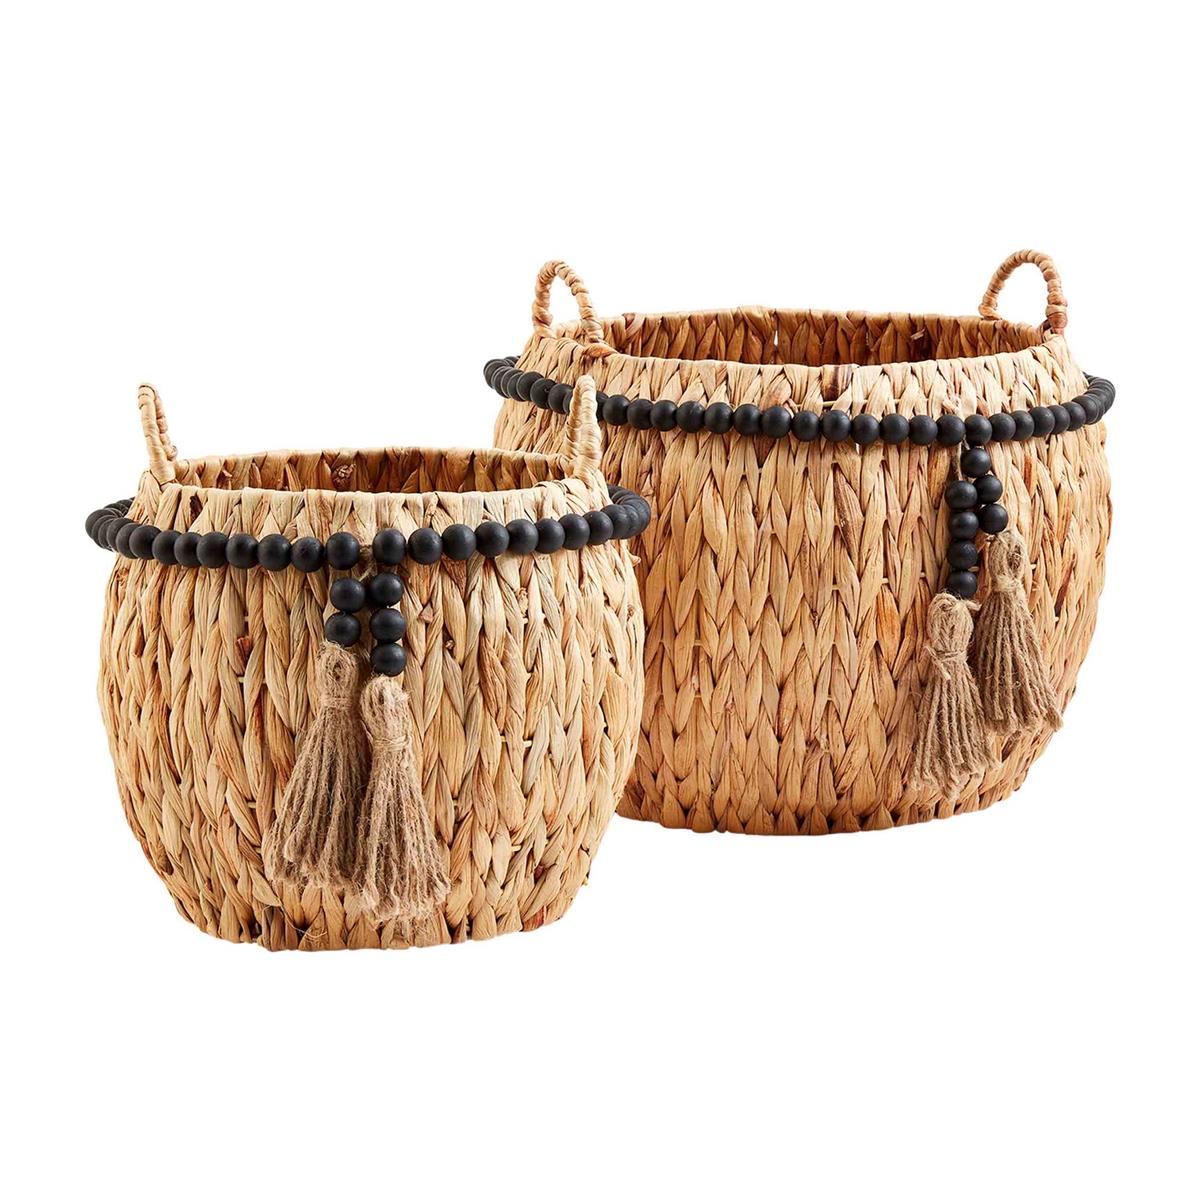 small and large hyacinth beaded tassel baskets against a white background